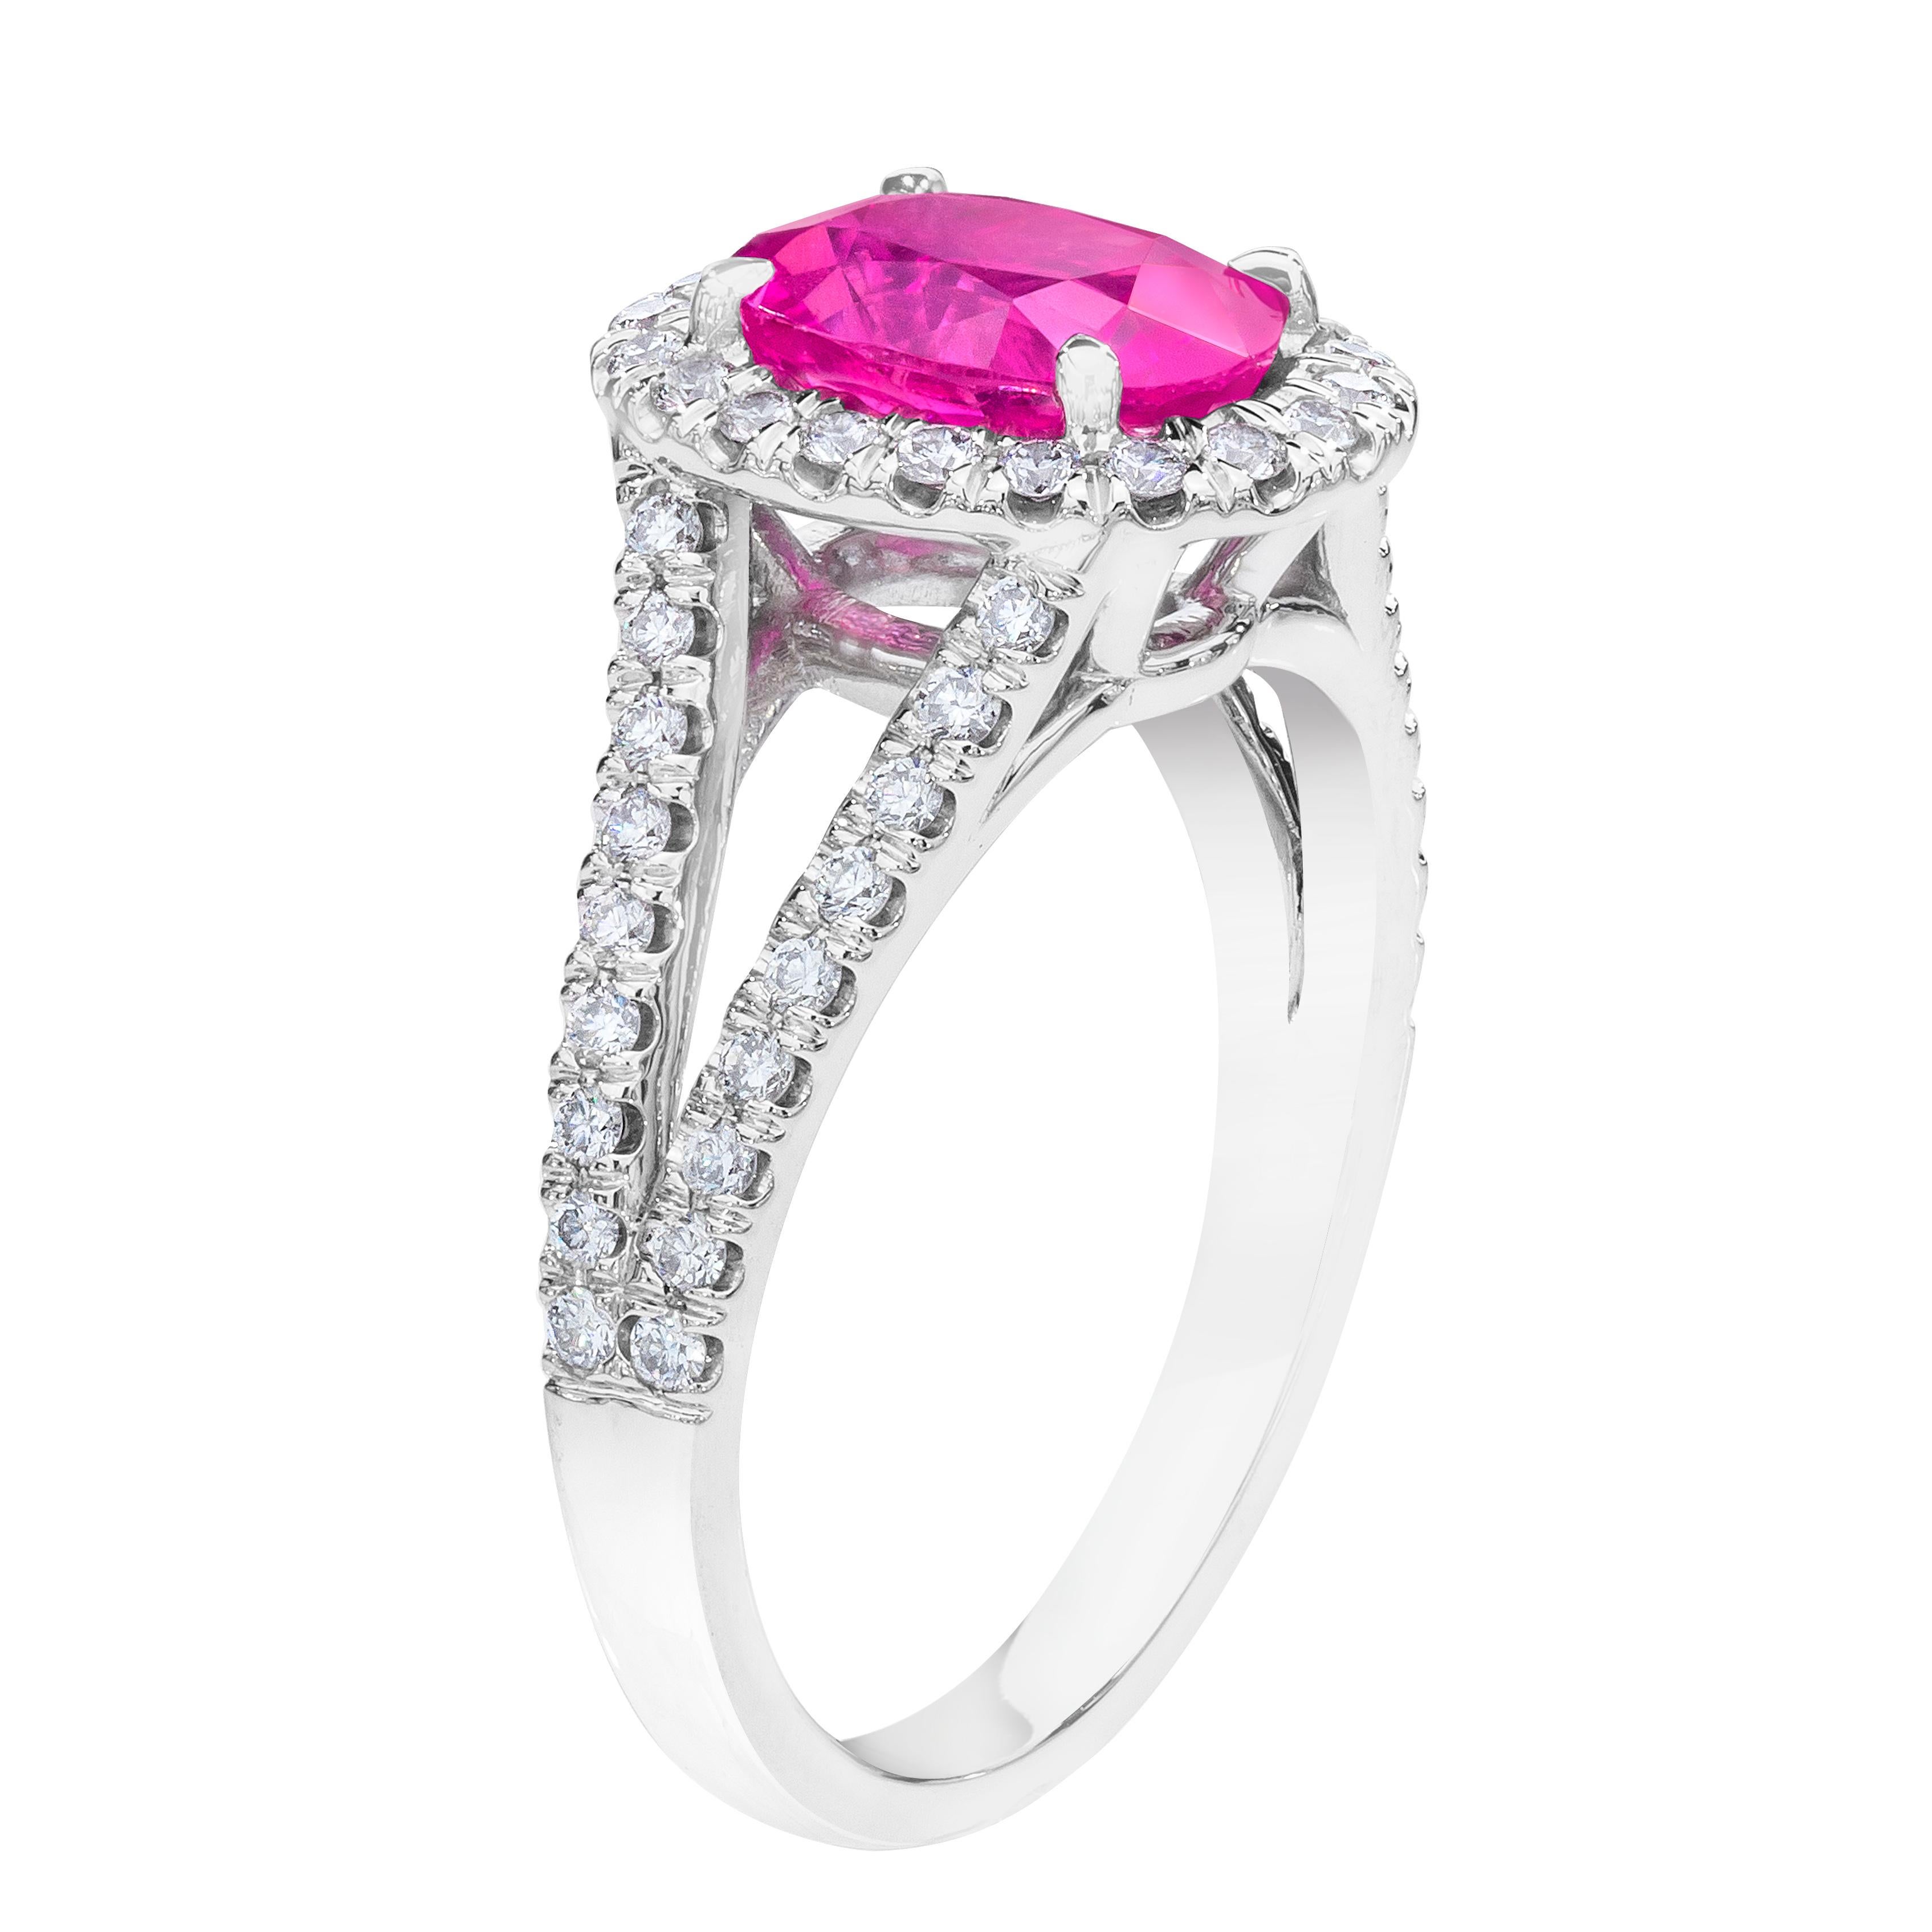 2.47 carat oval pink sapphire and round diamonds set in a platinum split shank ring. This ring is currently a size 7.  We will resize to your finger size without charge.
